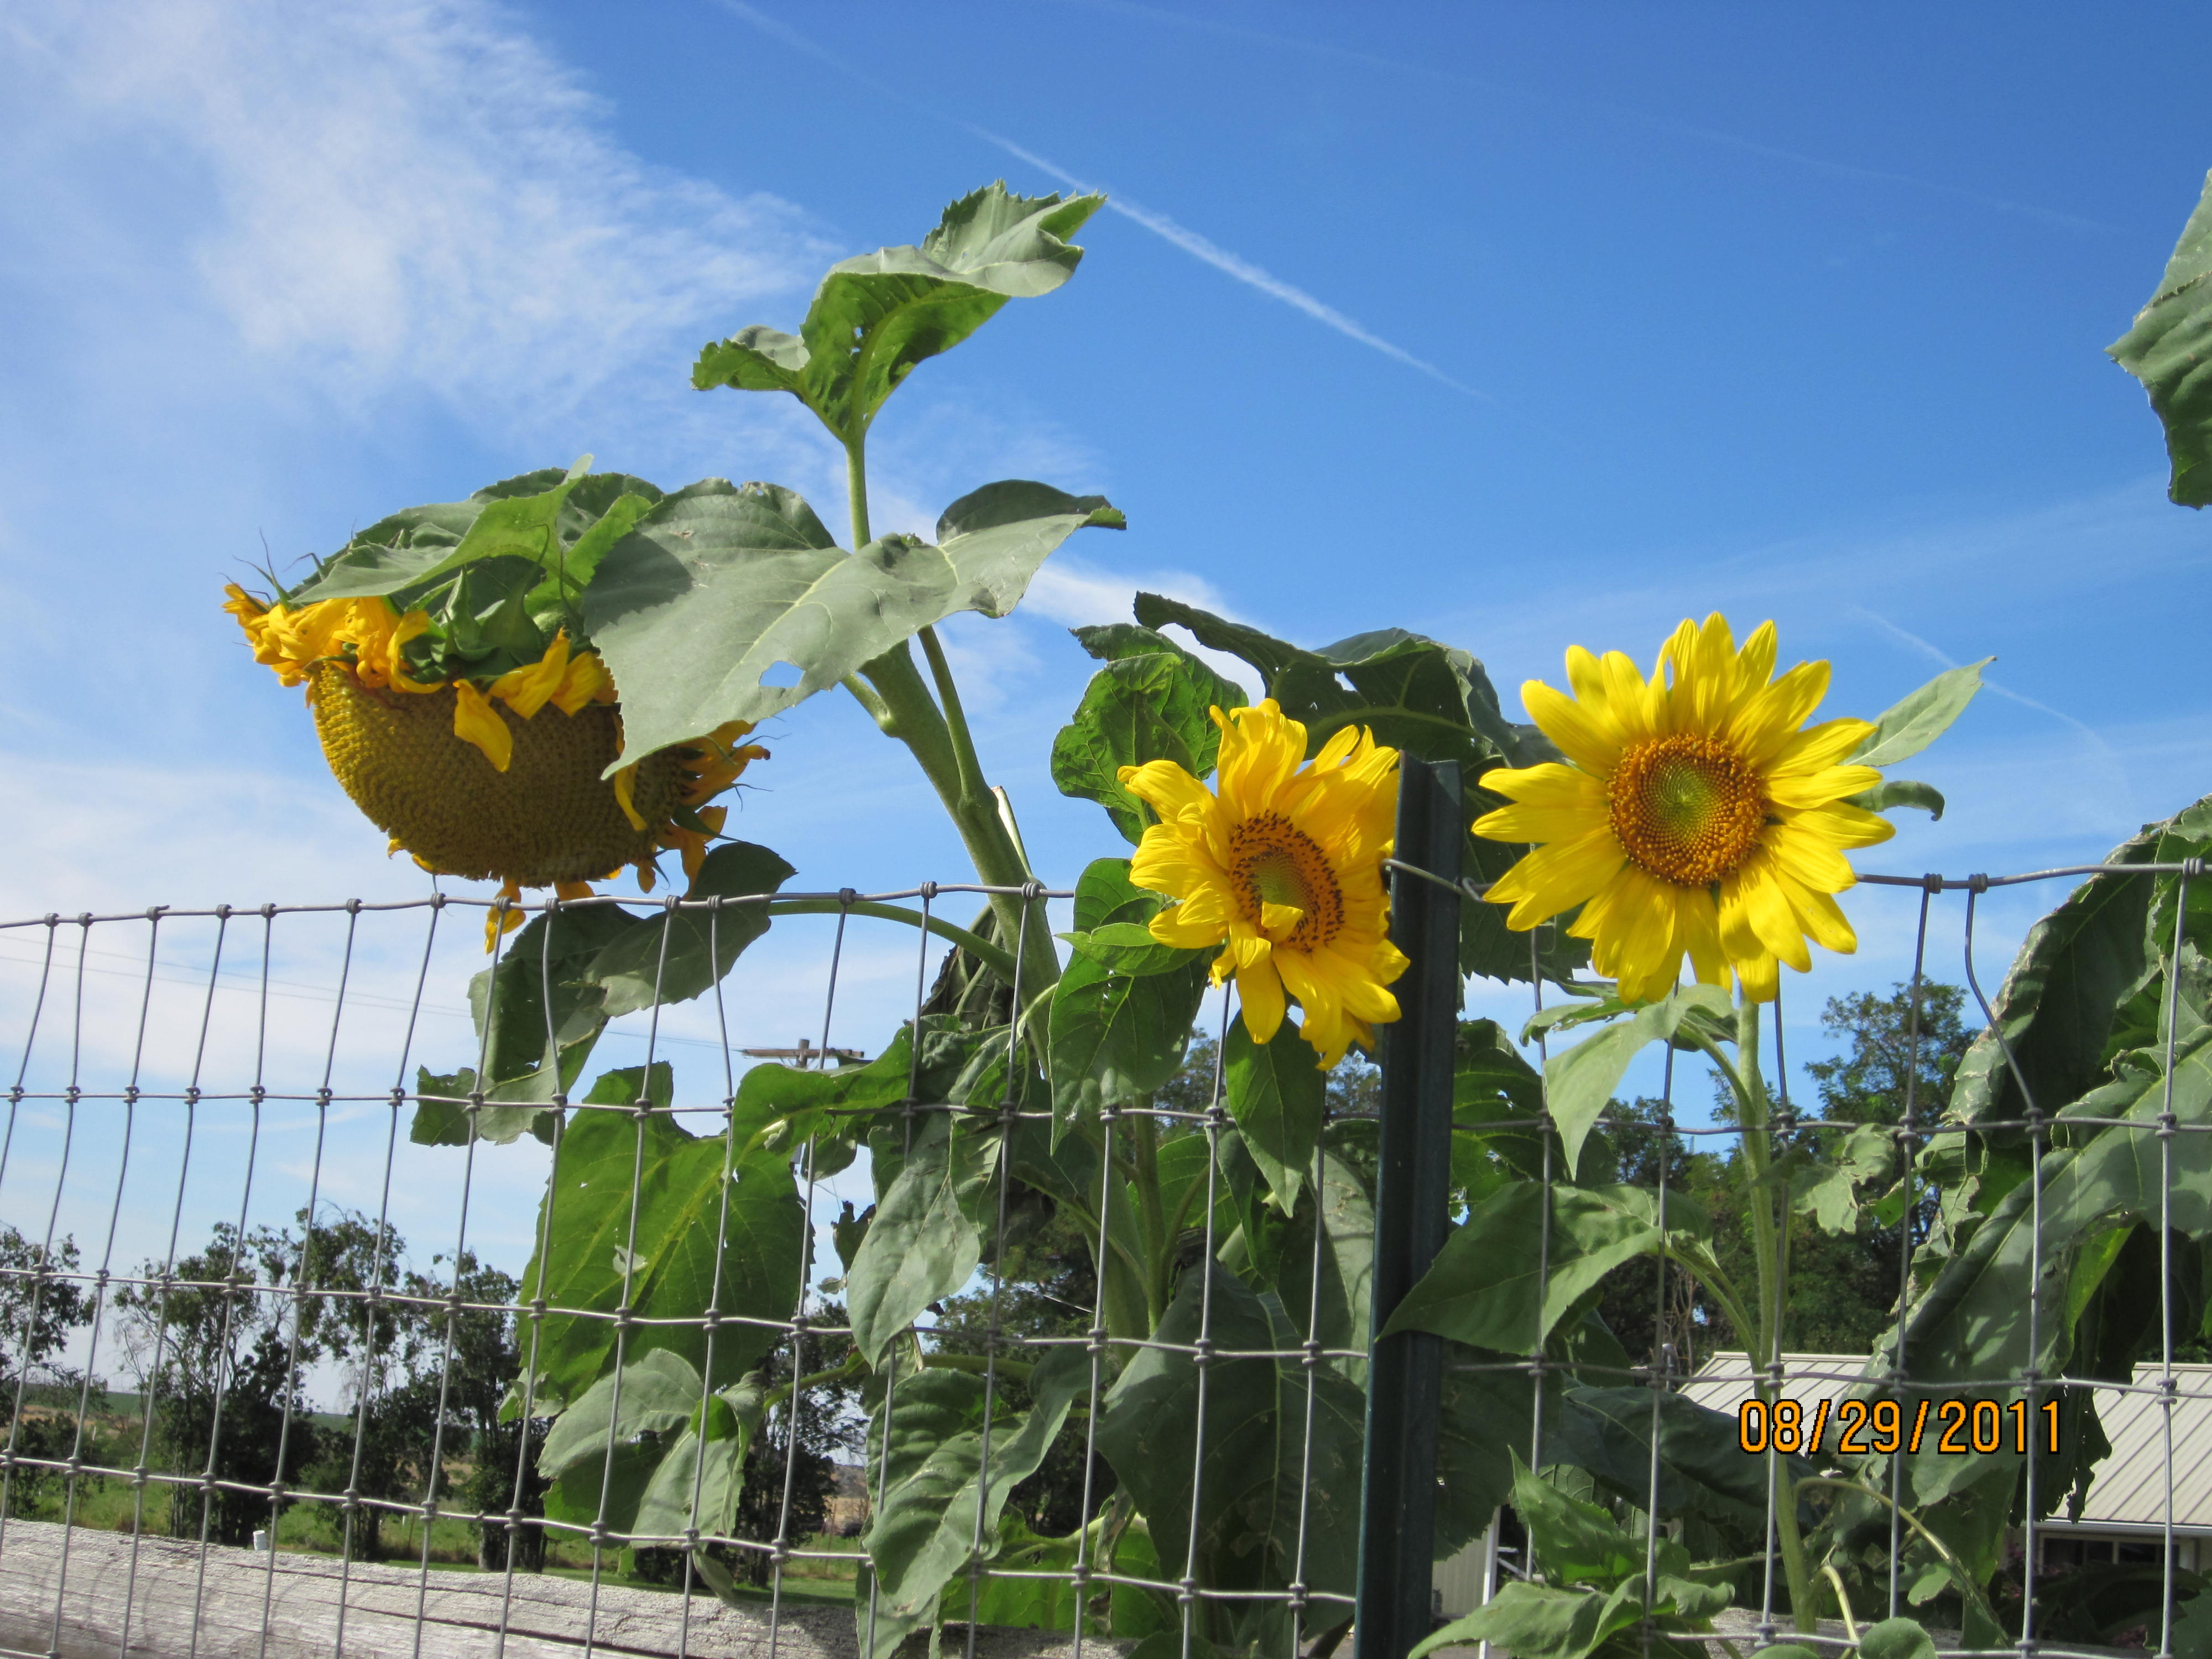 These sunflowers grew as tall as the chicken coop.  It is right by the garden.